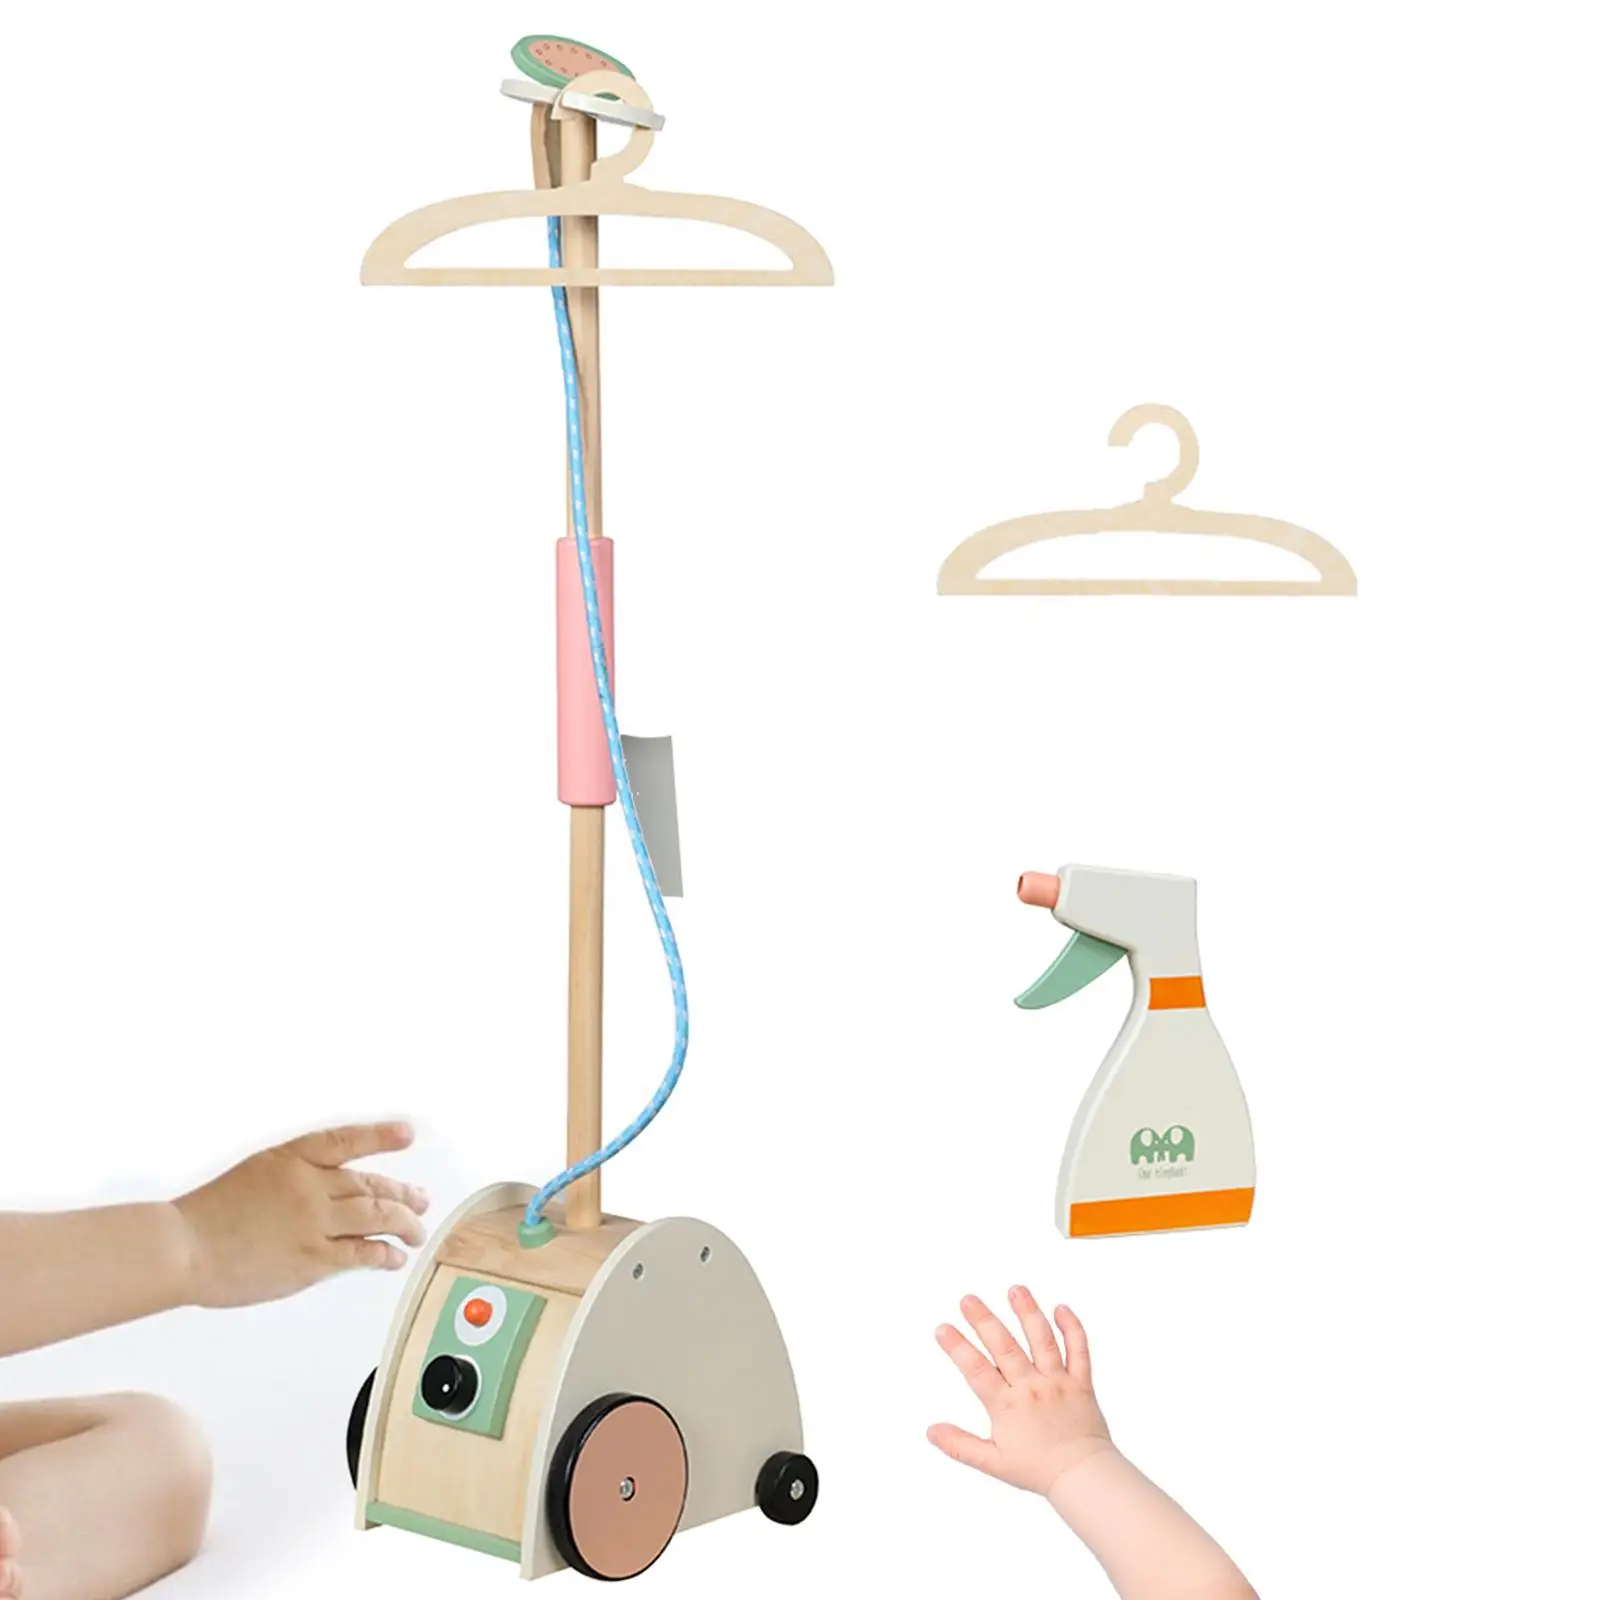 Mini Housekeeping Playset Realistic Educational Toy Montessori Durable Toddler Toy Garment Steamer for Birthday Gifts Boys Girls